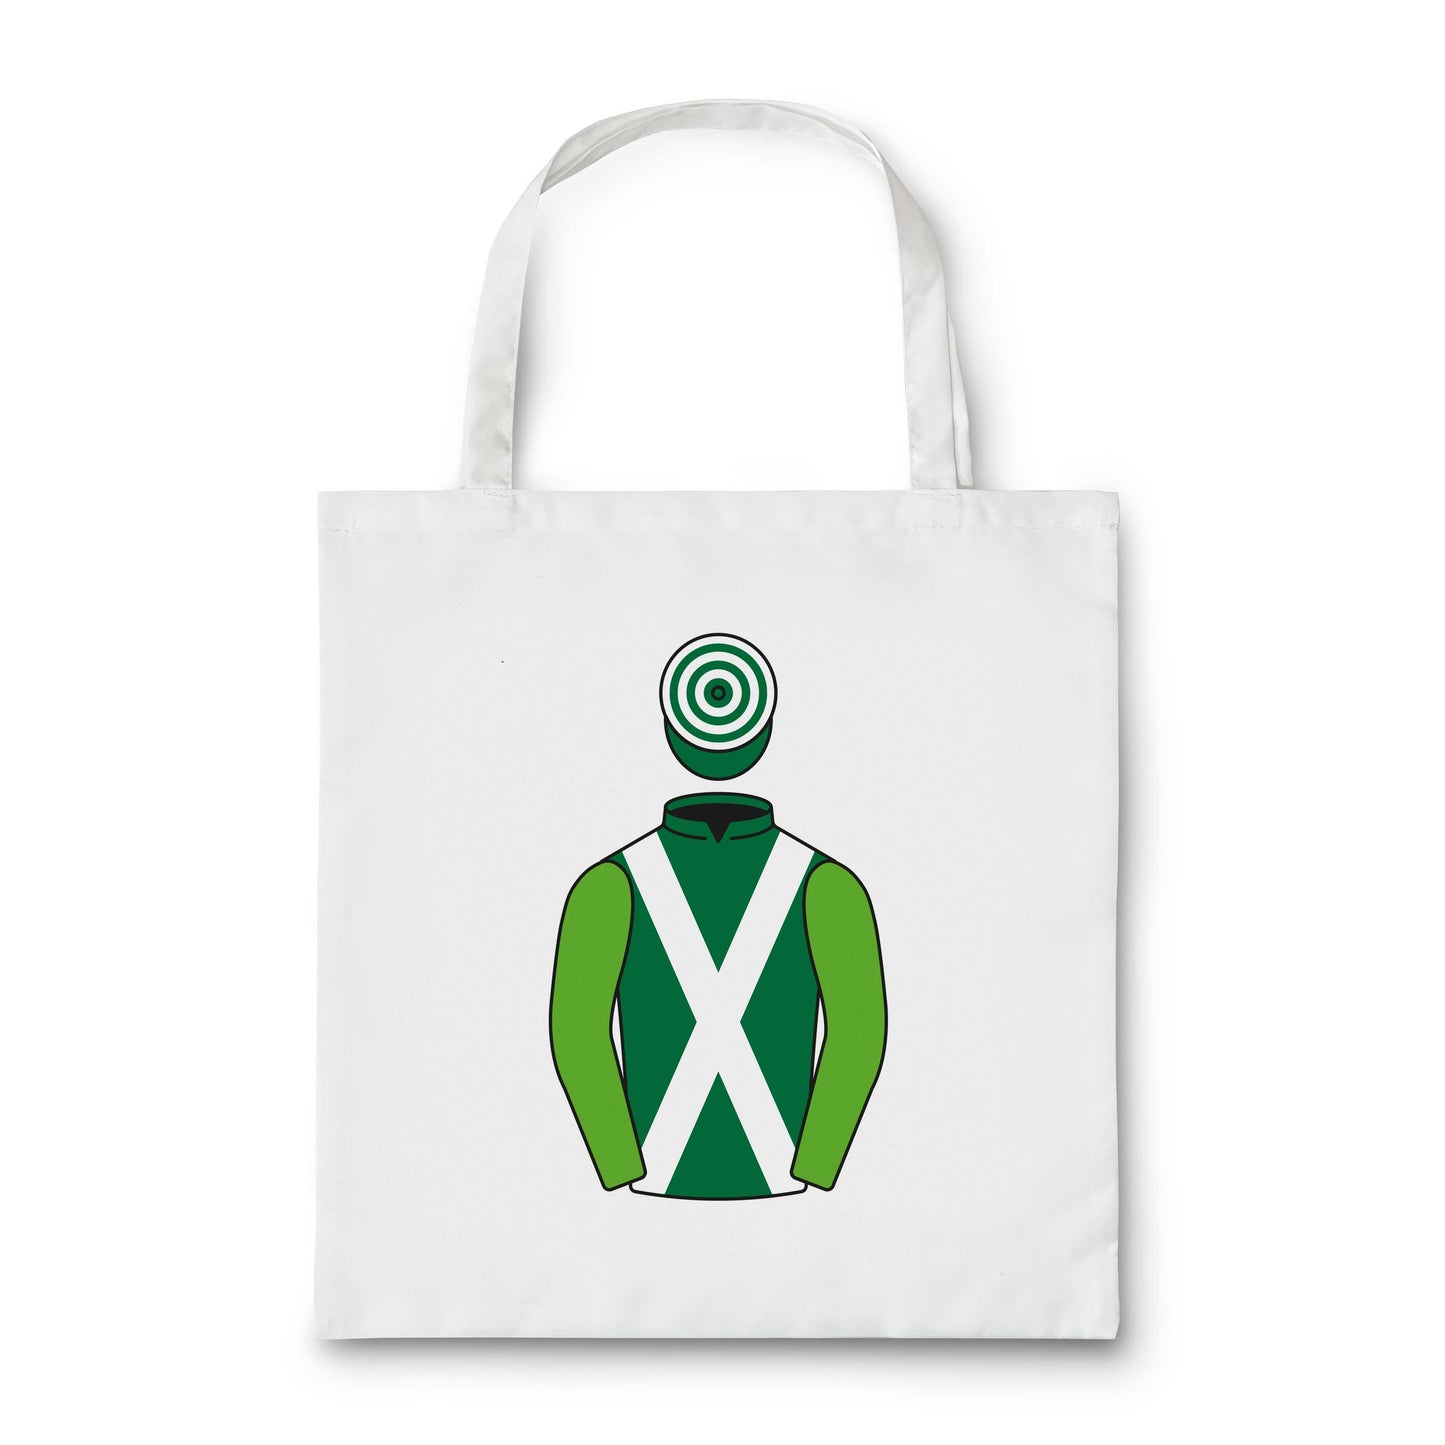 The Festival Goers Tote Bag - Tote Bag - Hacked Up